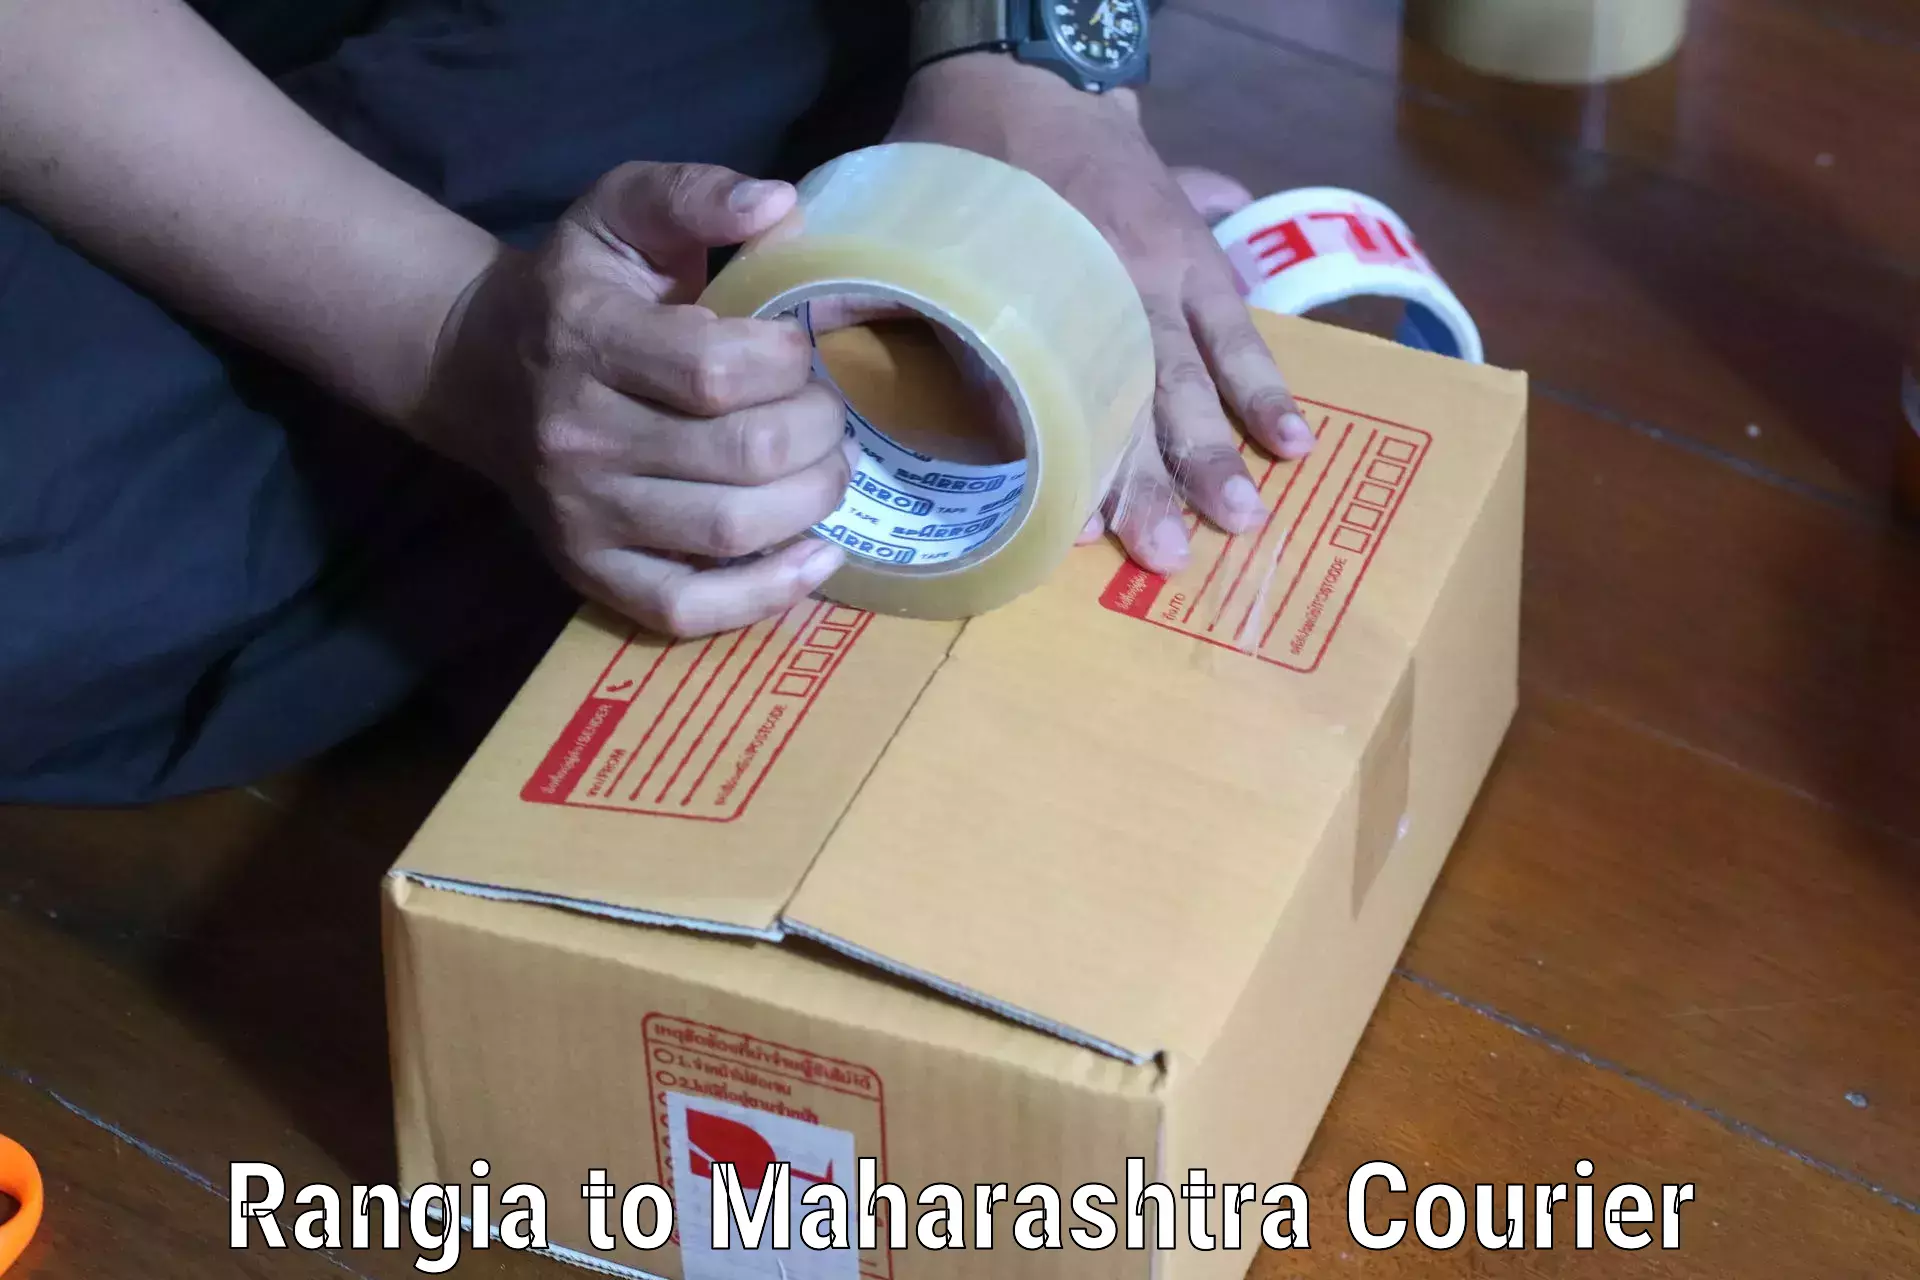 Subscription-based courier Rangia to Nagpur